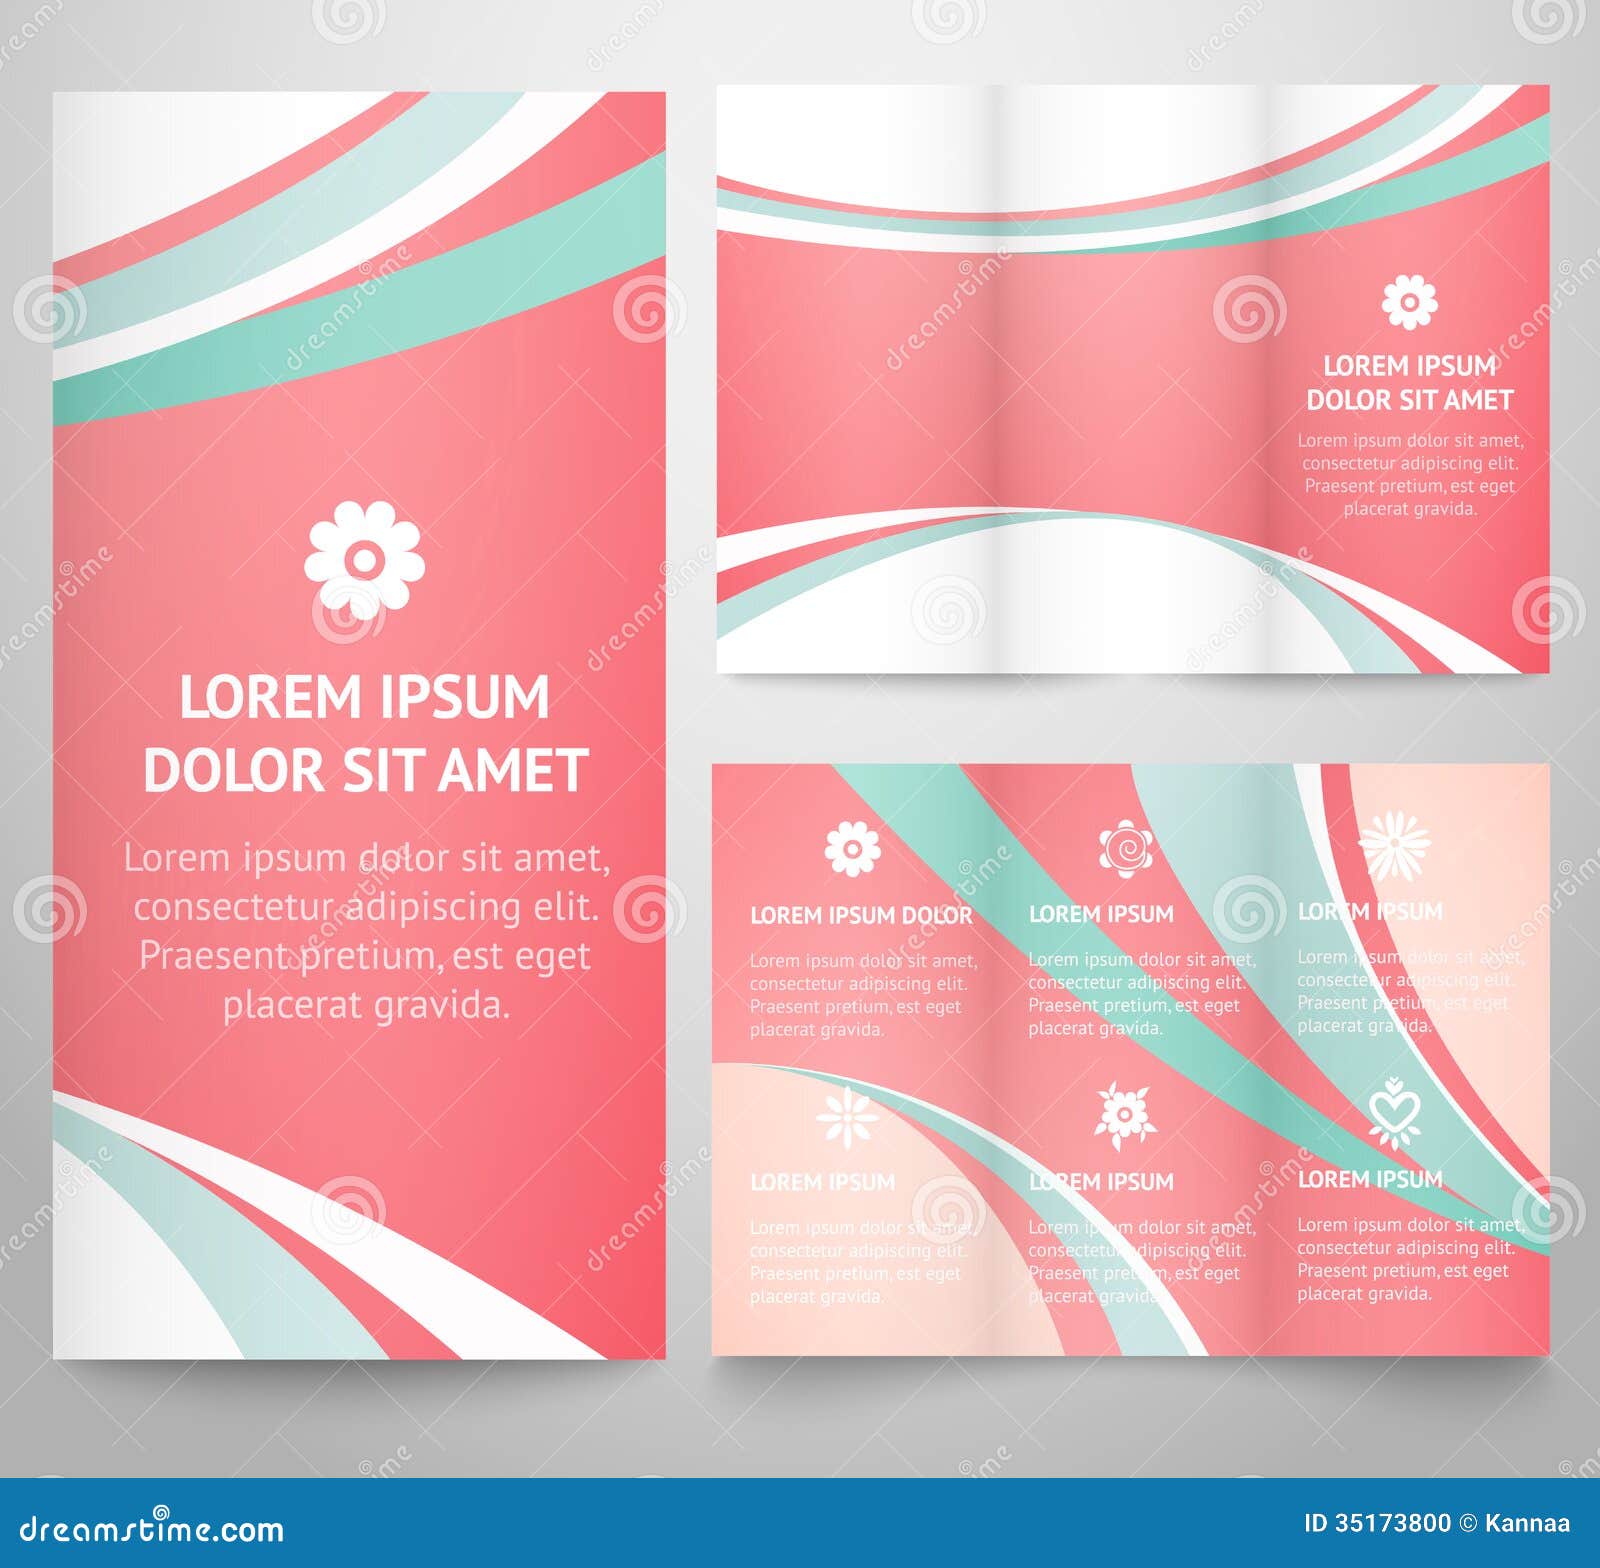 professional flyer templates free download